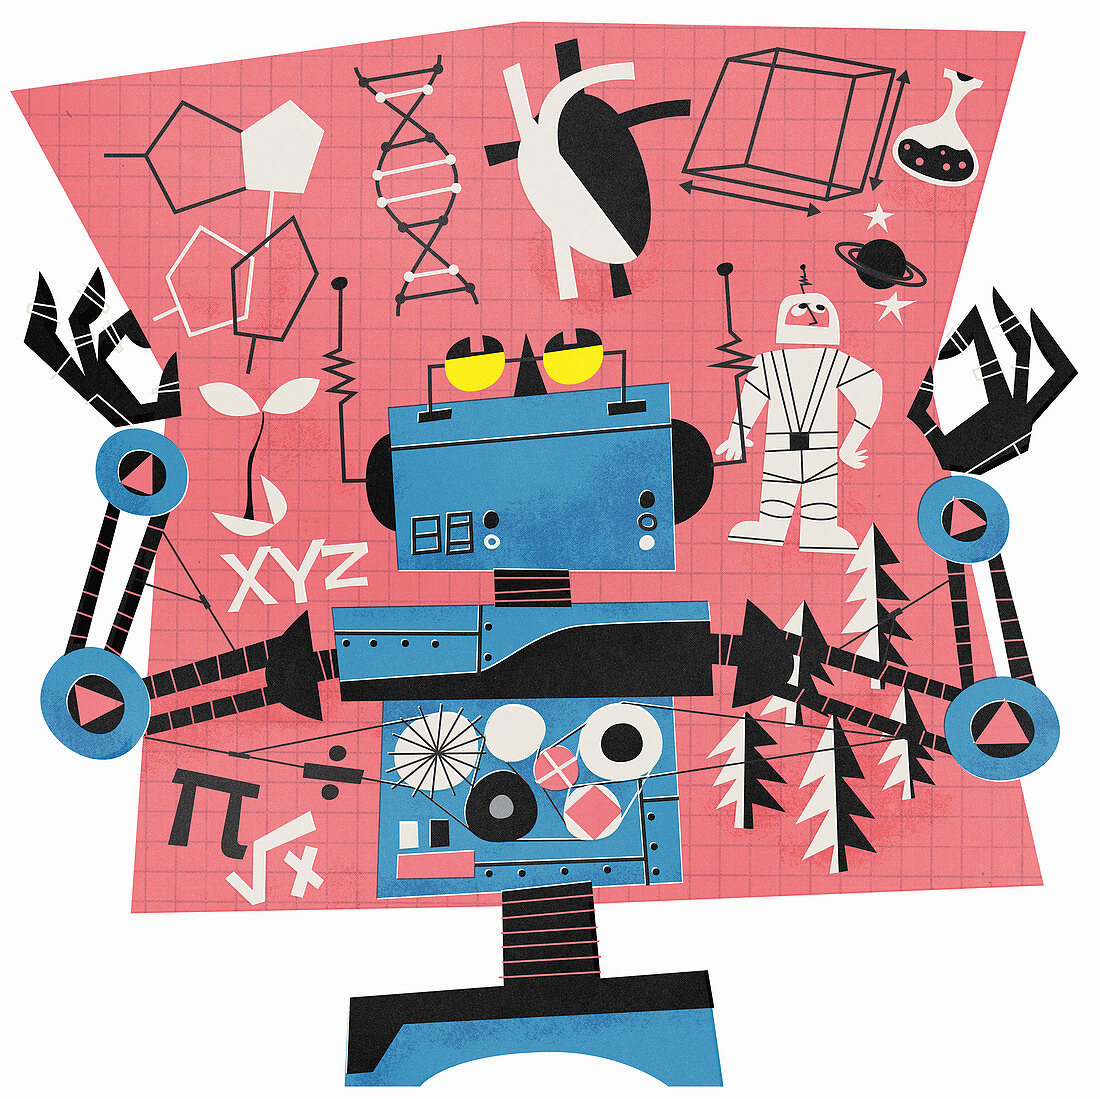 Robot reading chart about science and nature, illustration